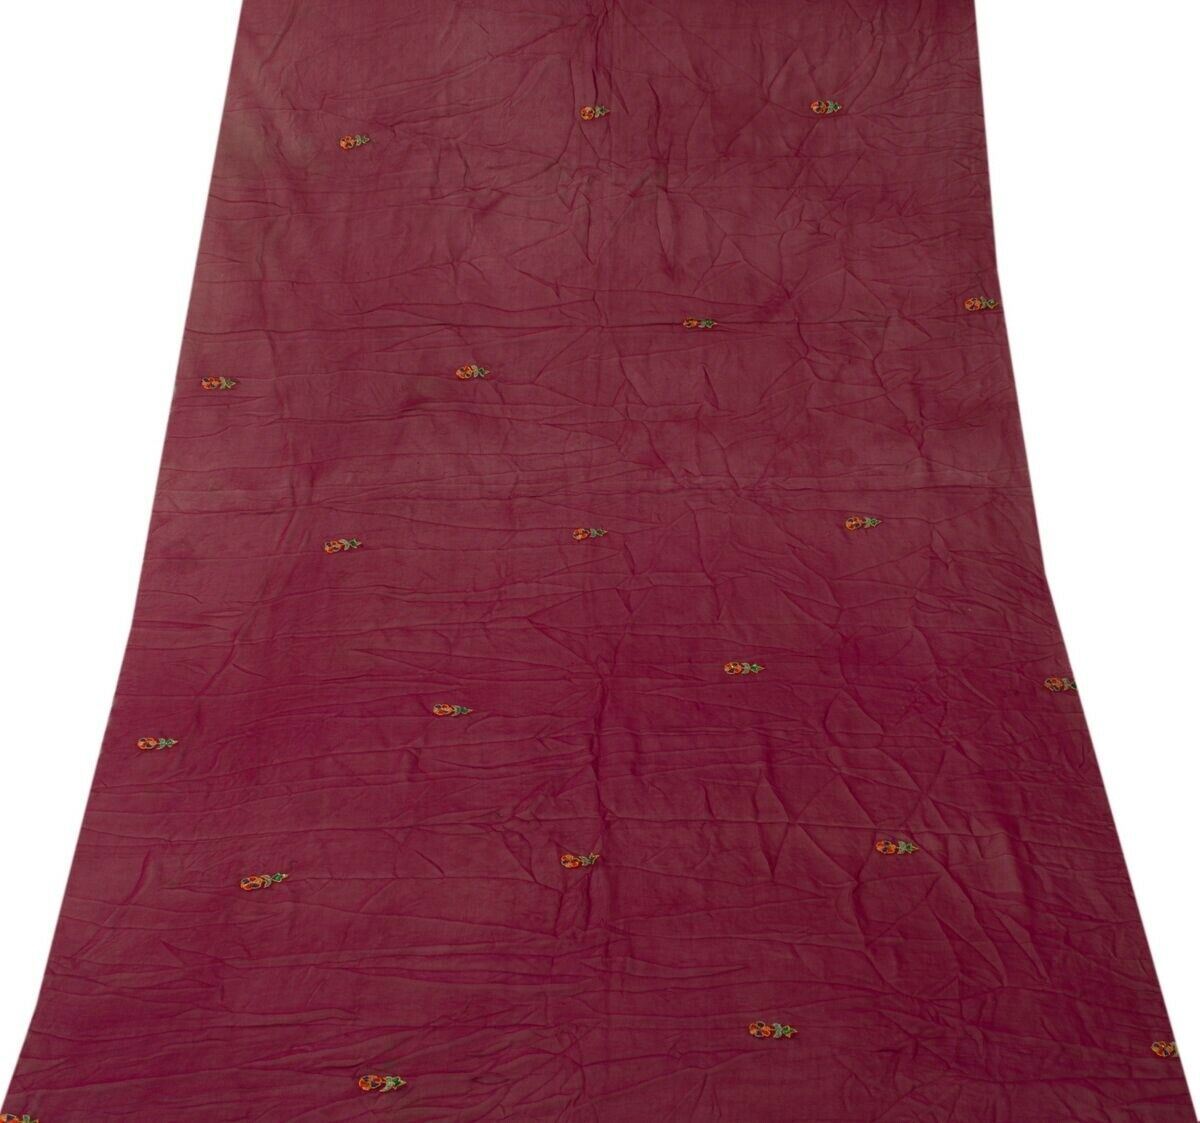 Pure Georgette Silk Embroidered Vintage Sari Remnant Scrap Fabric for Sew Craft